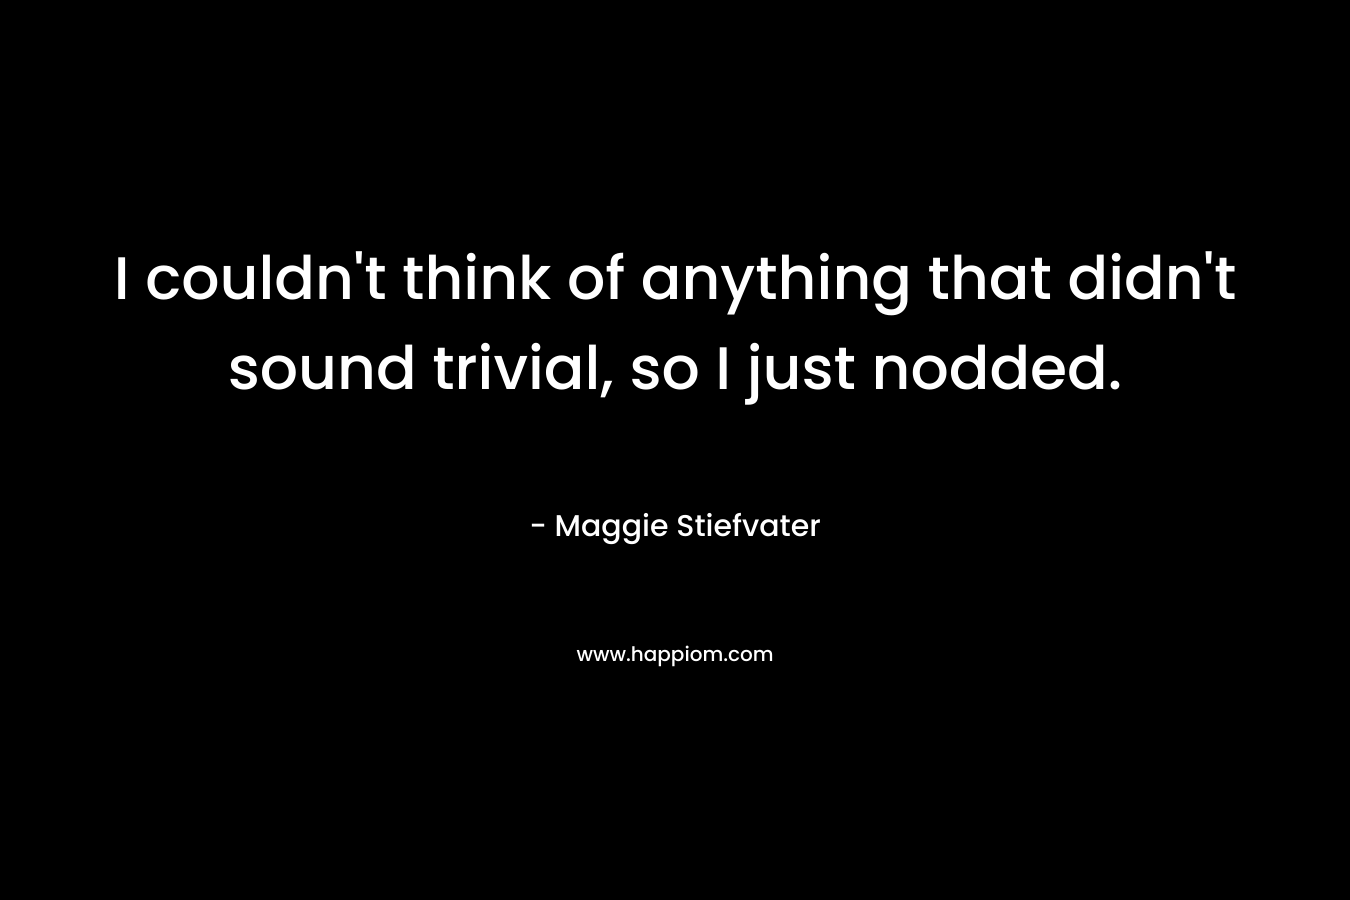 I couldn’t think of anything that didn’t sound trivial, so I just nodded. – Maggie Stiefvater